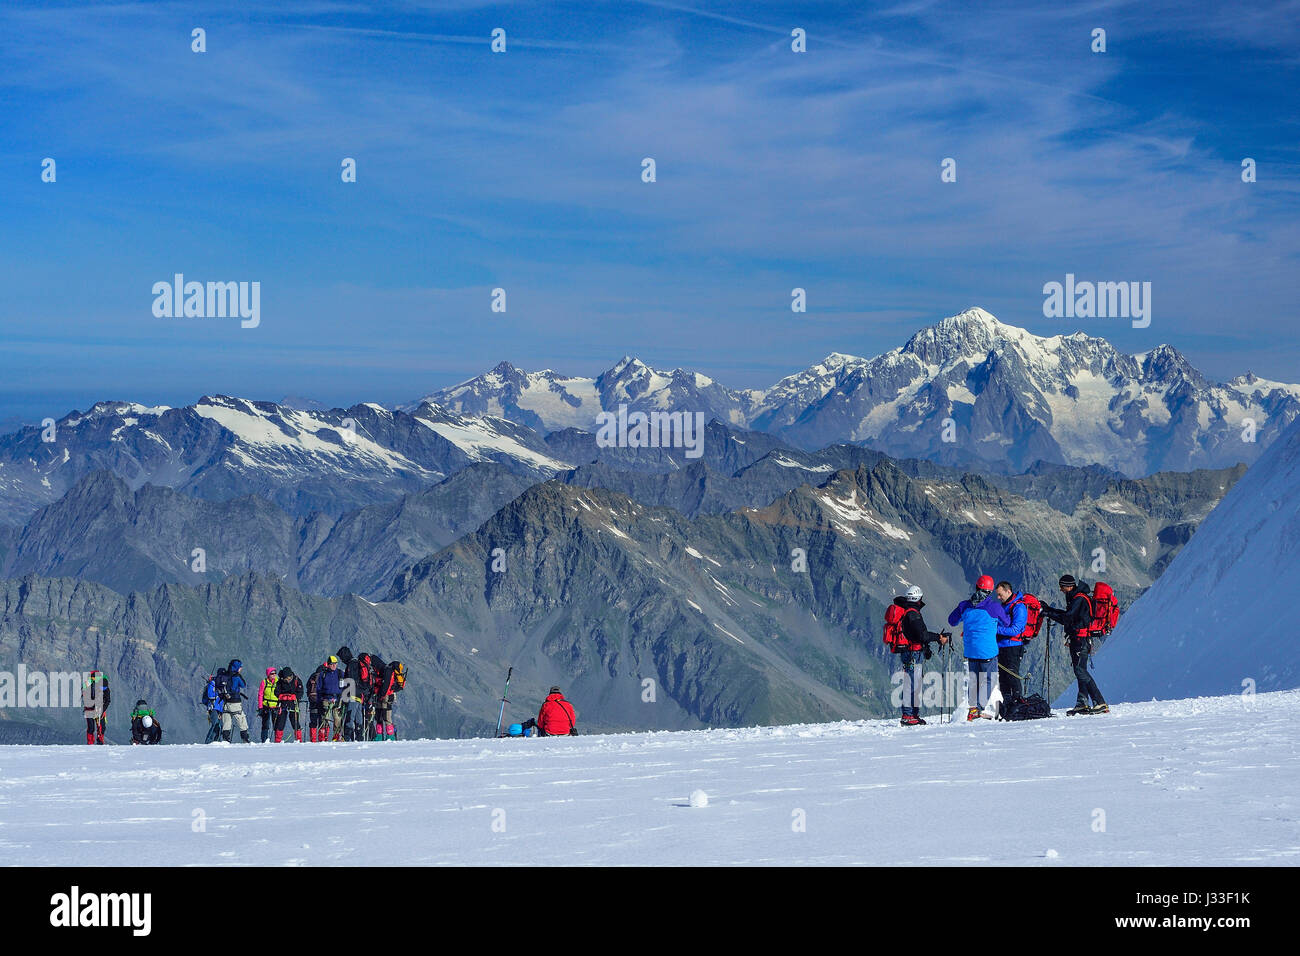 Several groups of persons standing on glacier of Gran Paradiso, Gran Paradiso, Gran Paradiso Nationalpark, Graian Alps range, valley of Aosta, Aosta, Italy Stock Photo